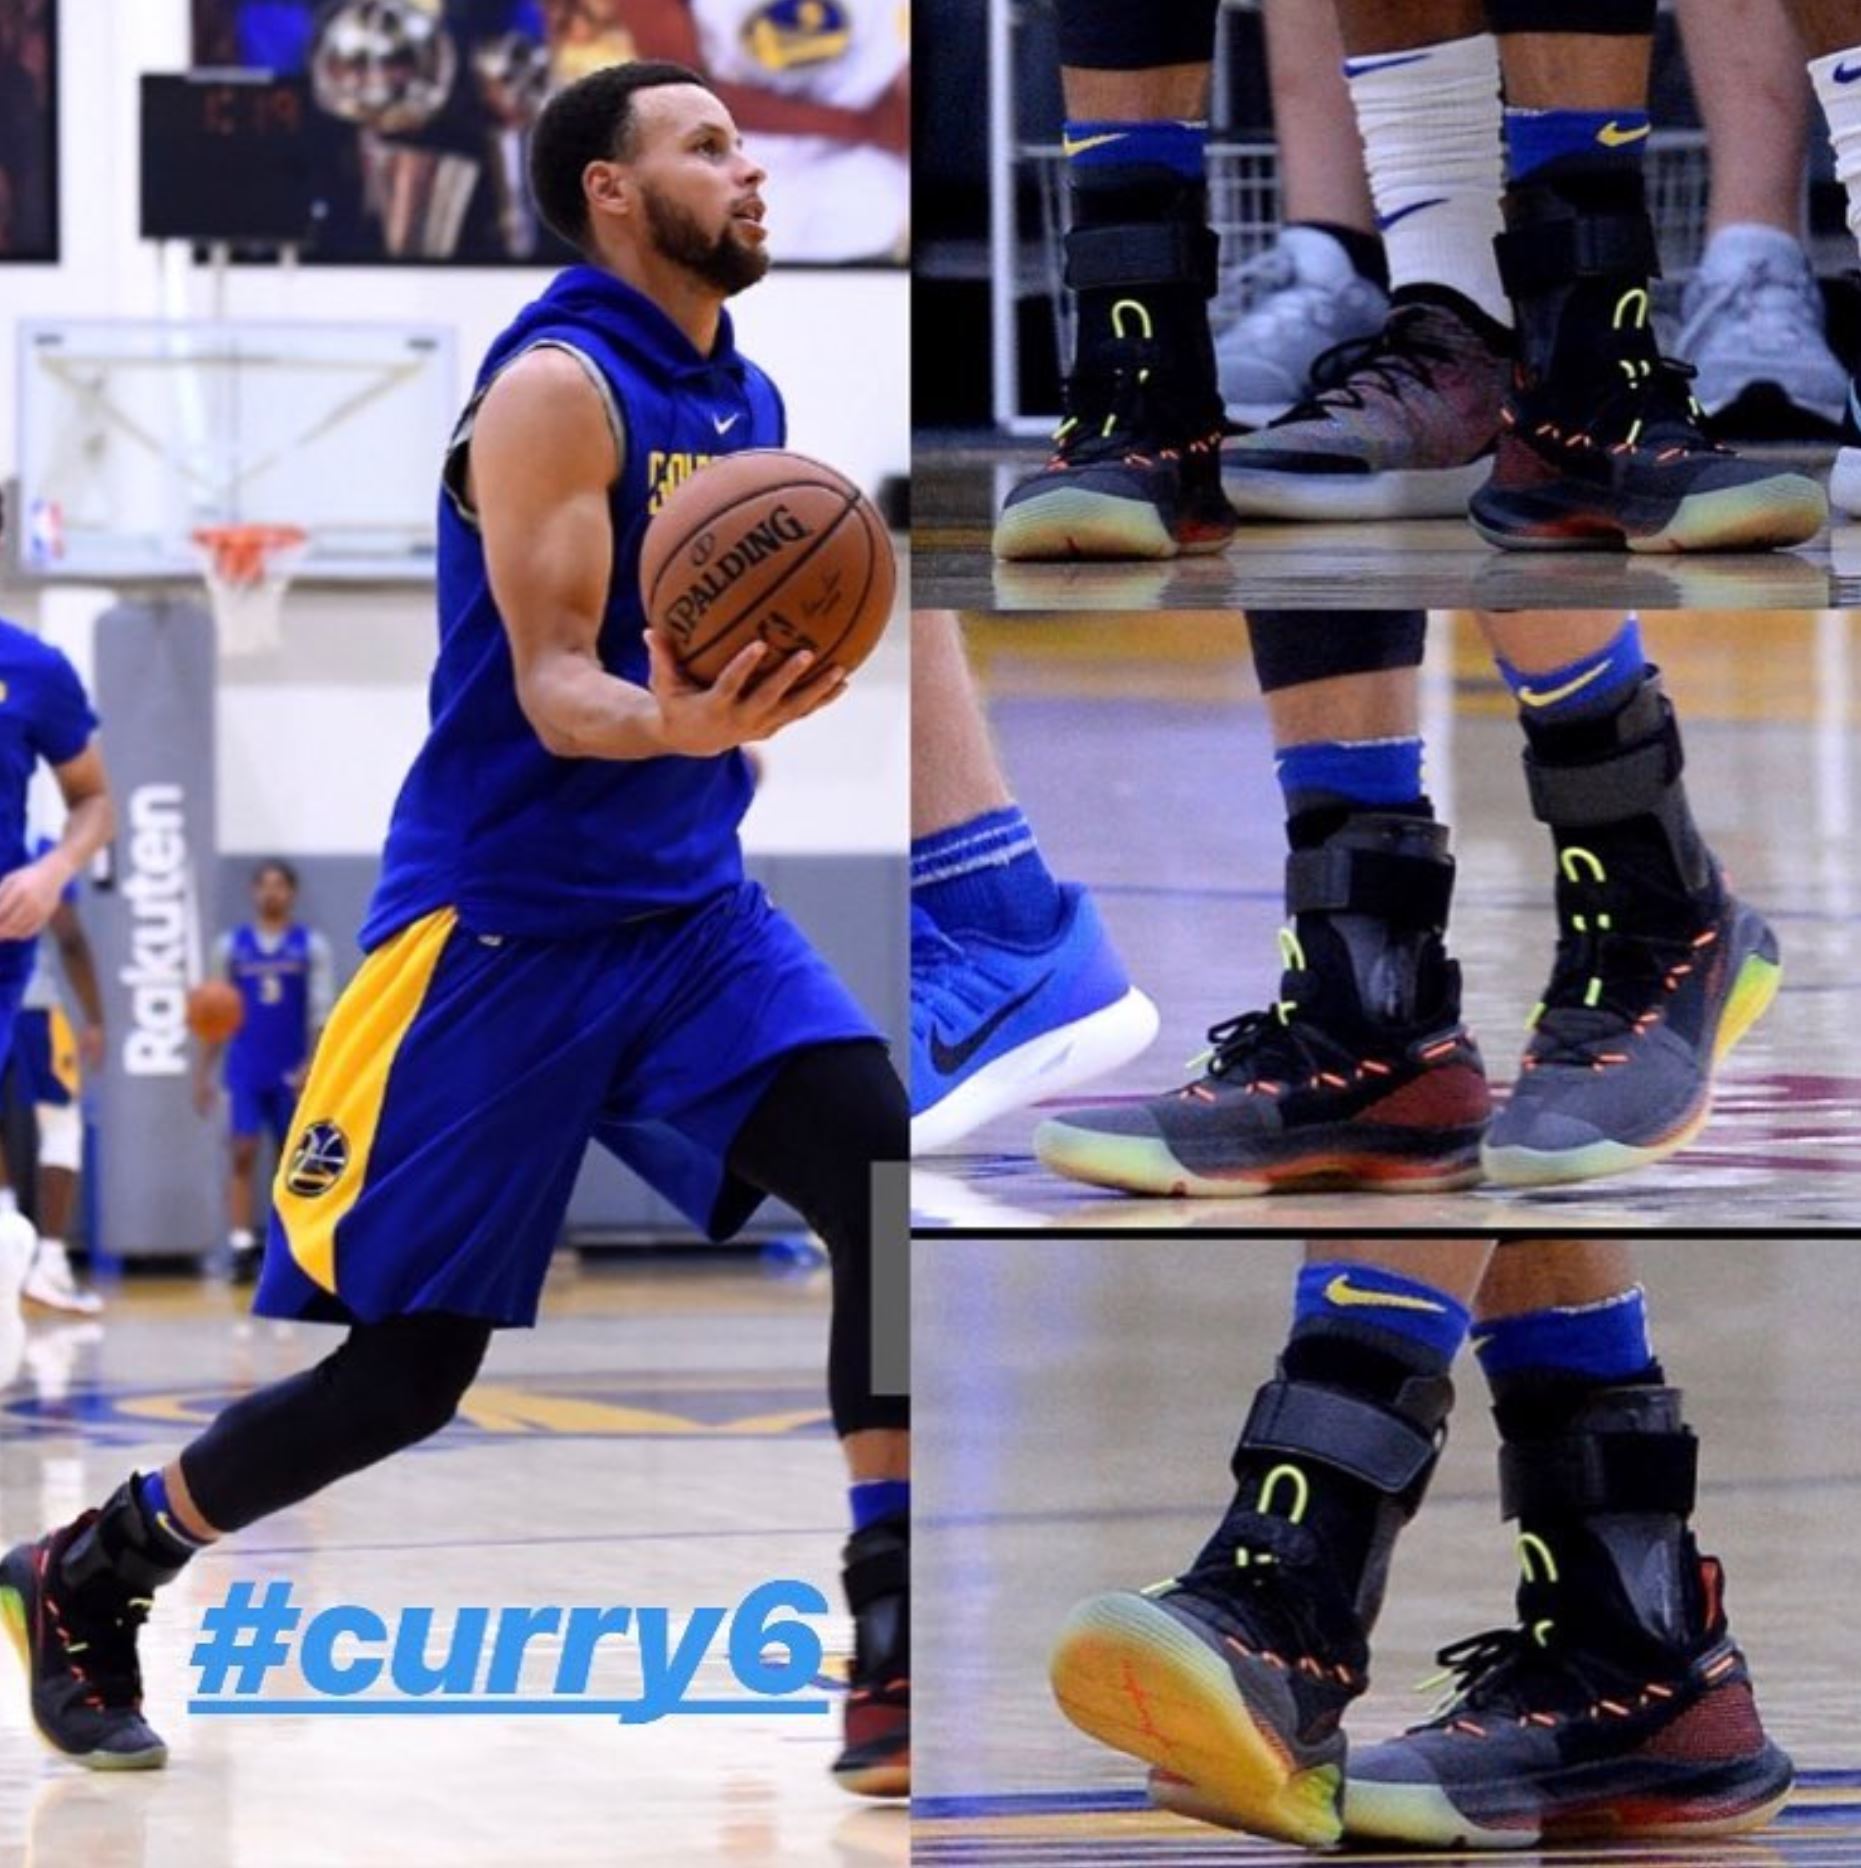 Steph Curry Wears Possible Curry 6 at 